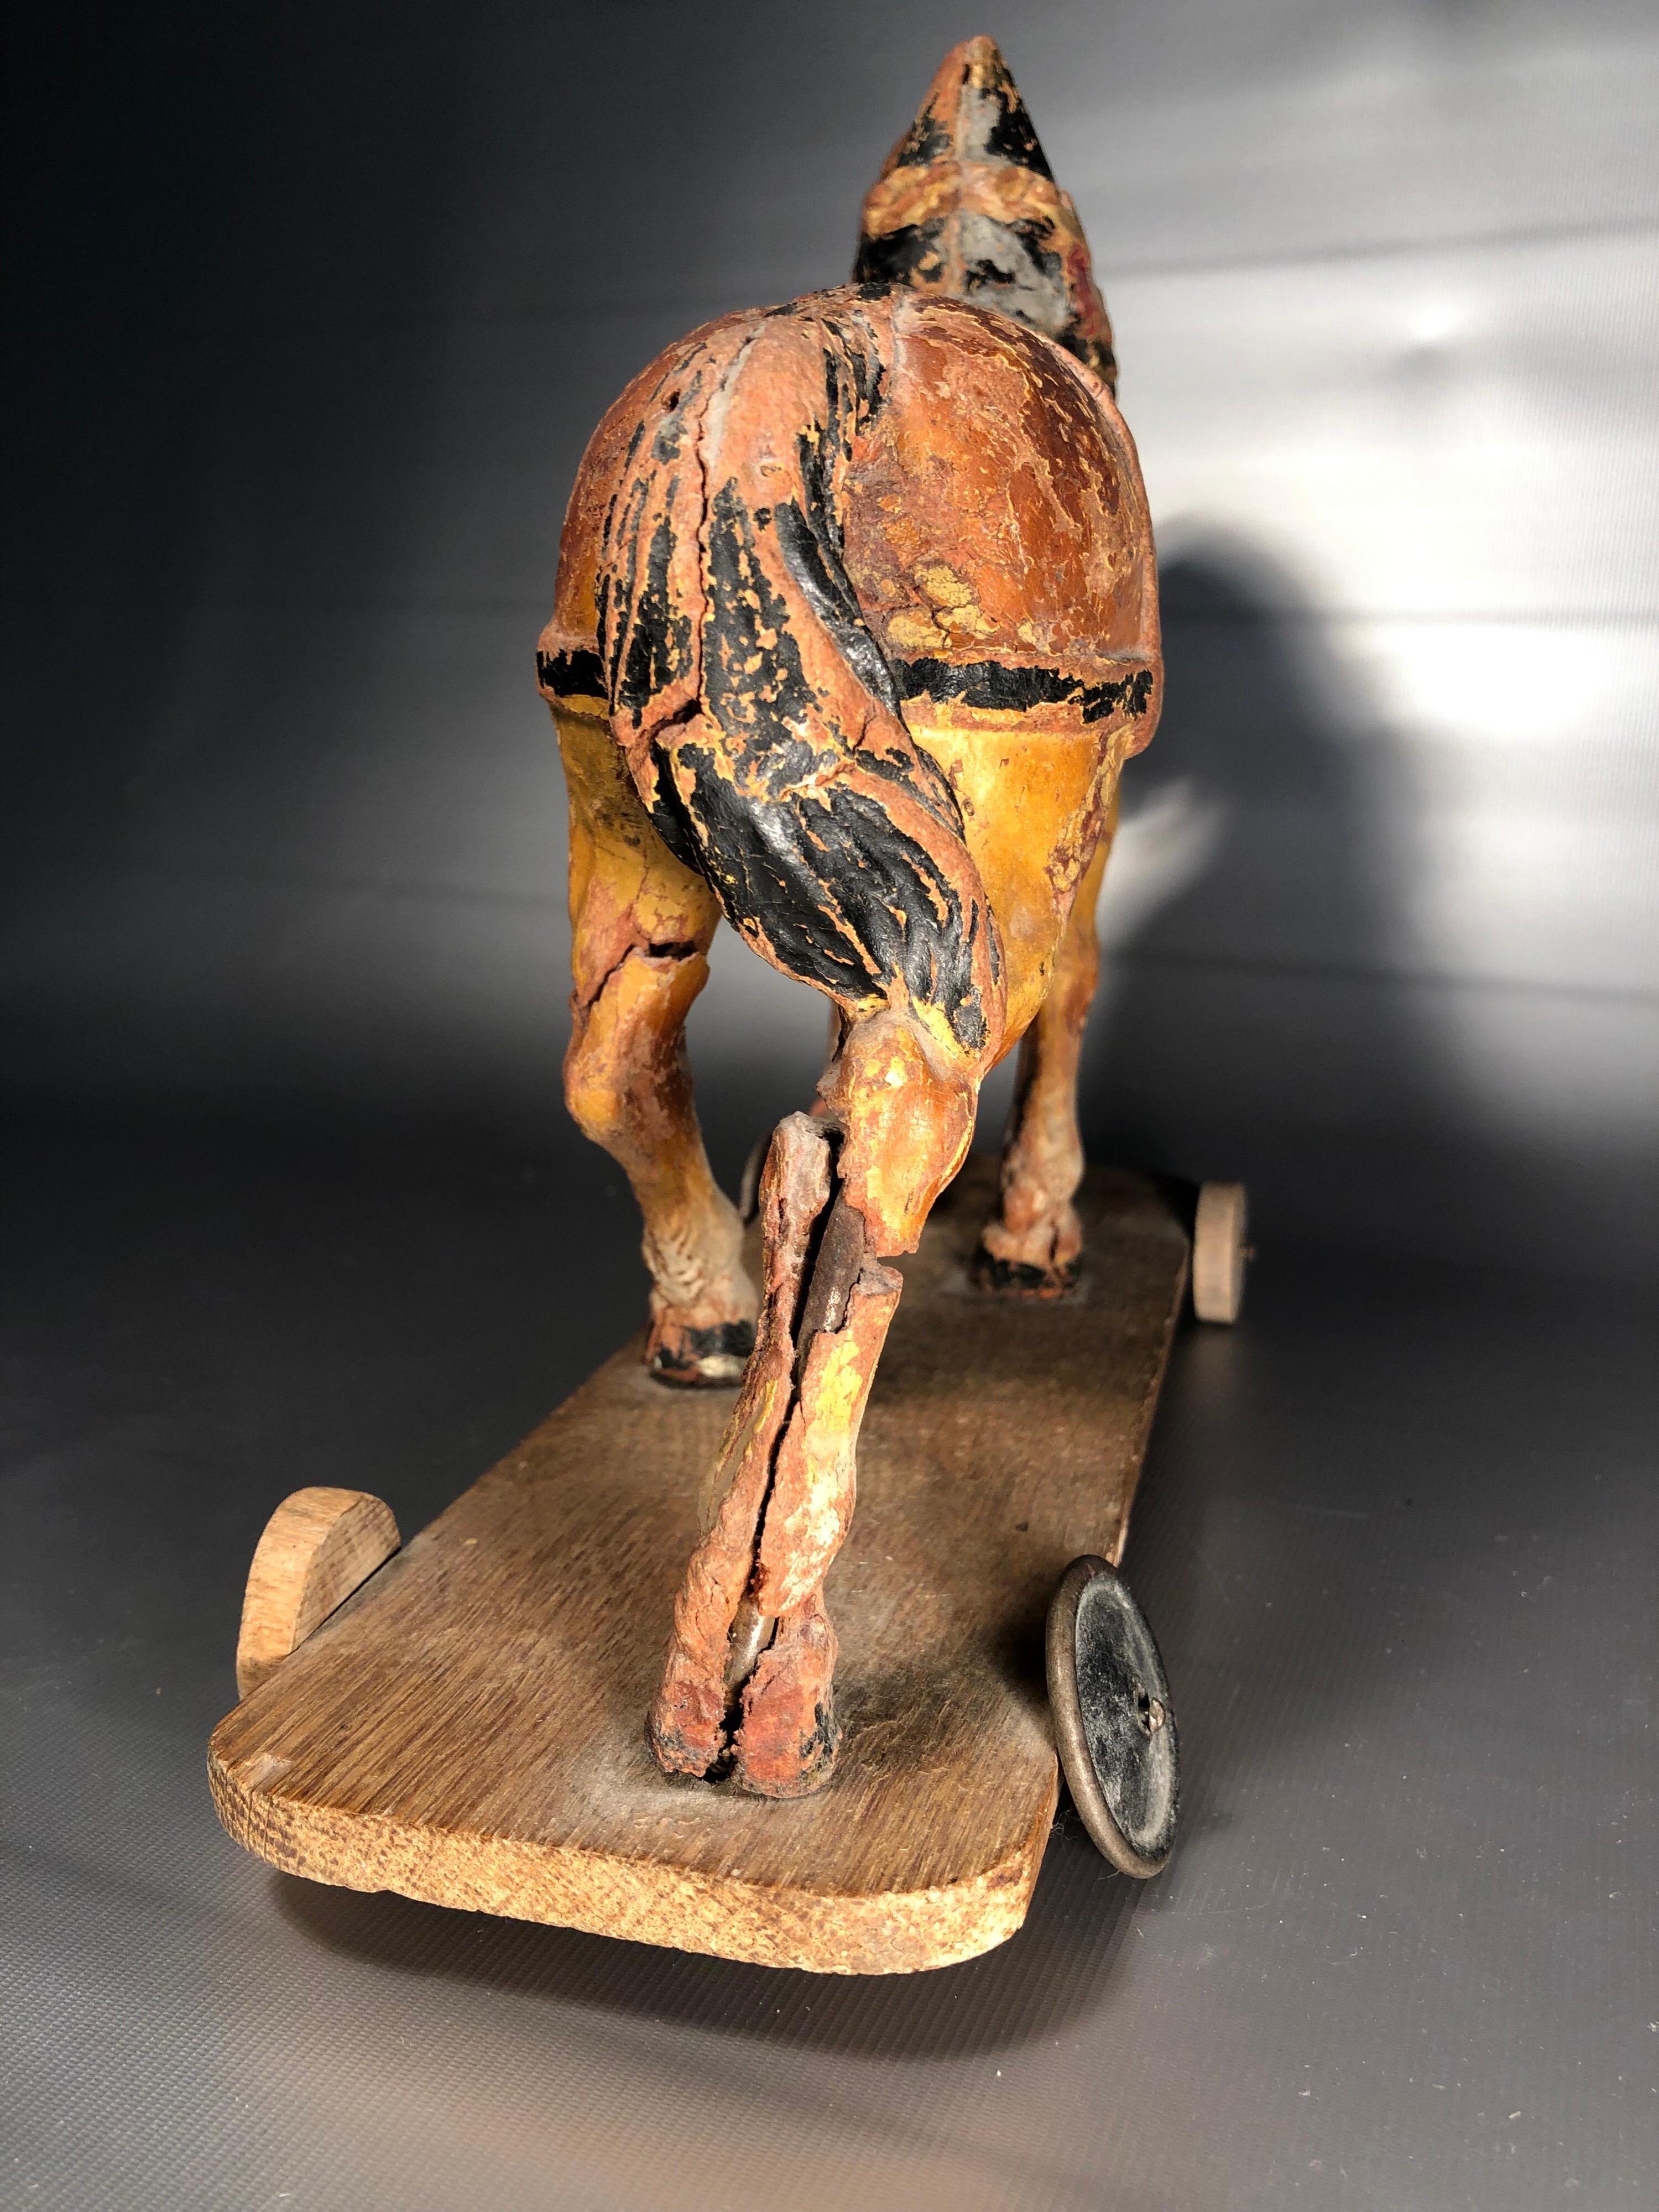 Chinese Antique Wooden Toy Horse, 19th Century ON SALE 